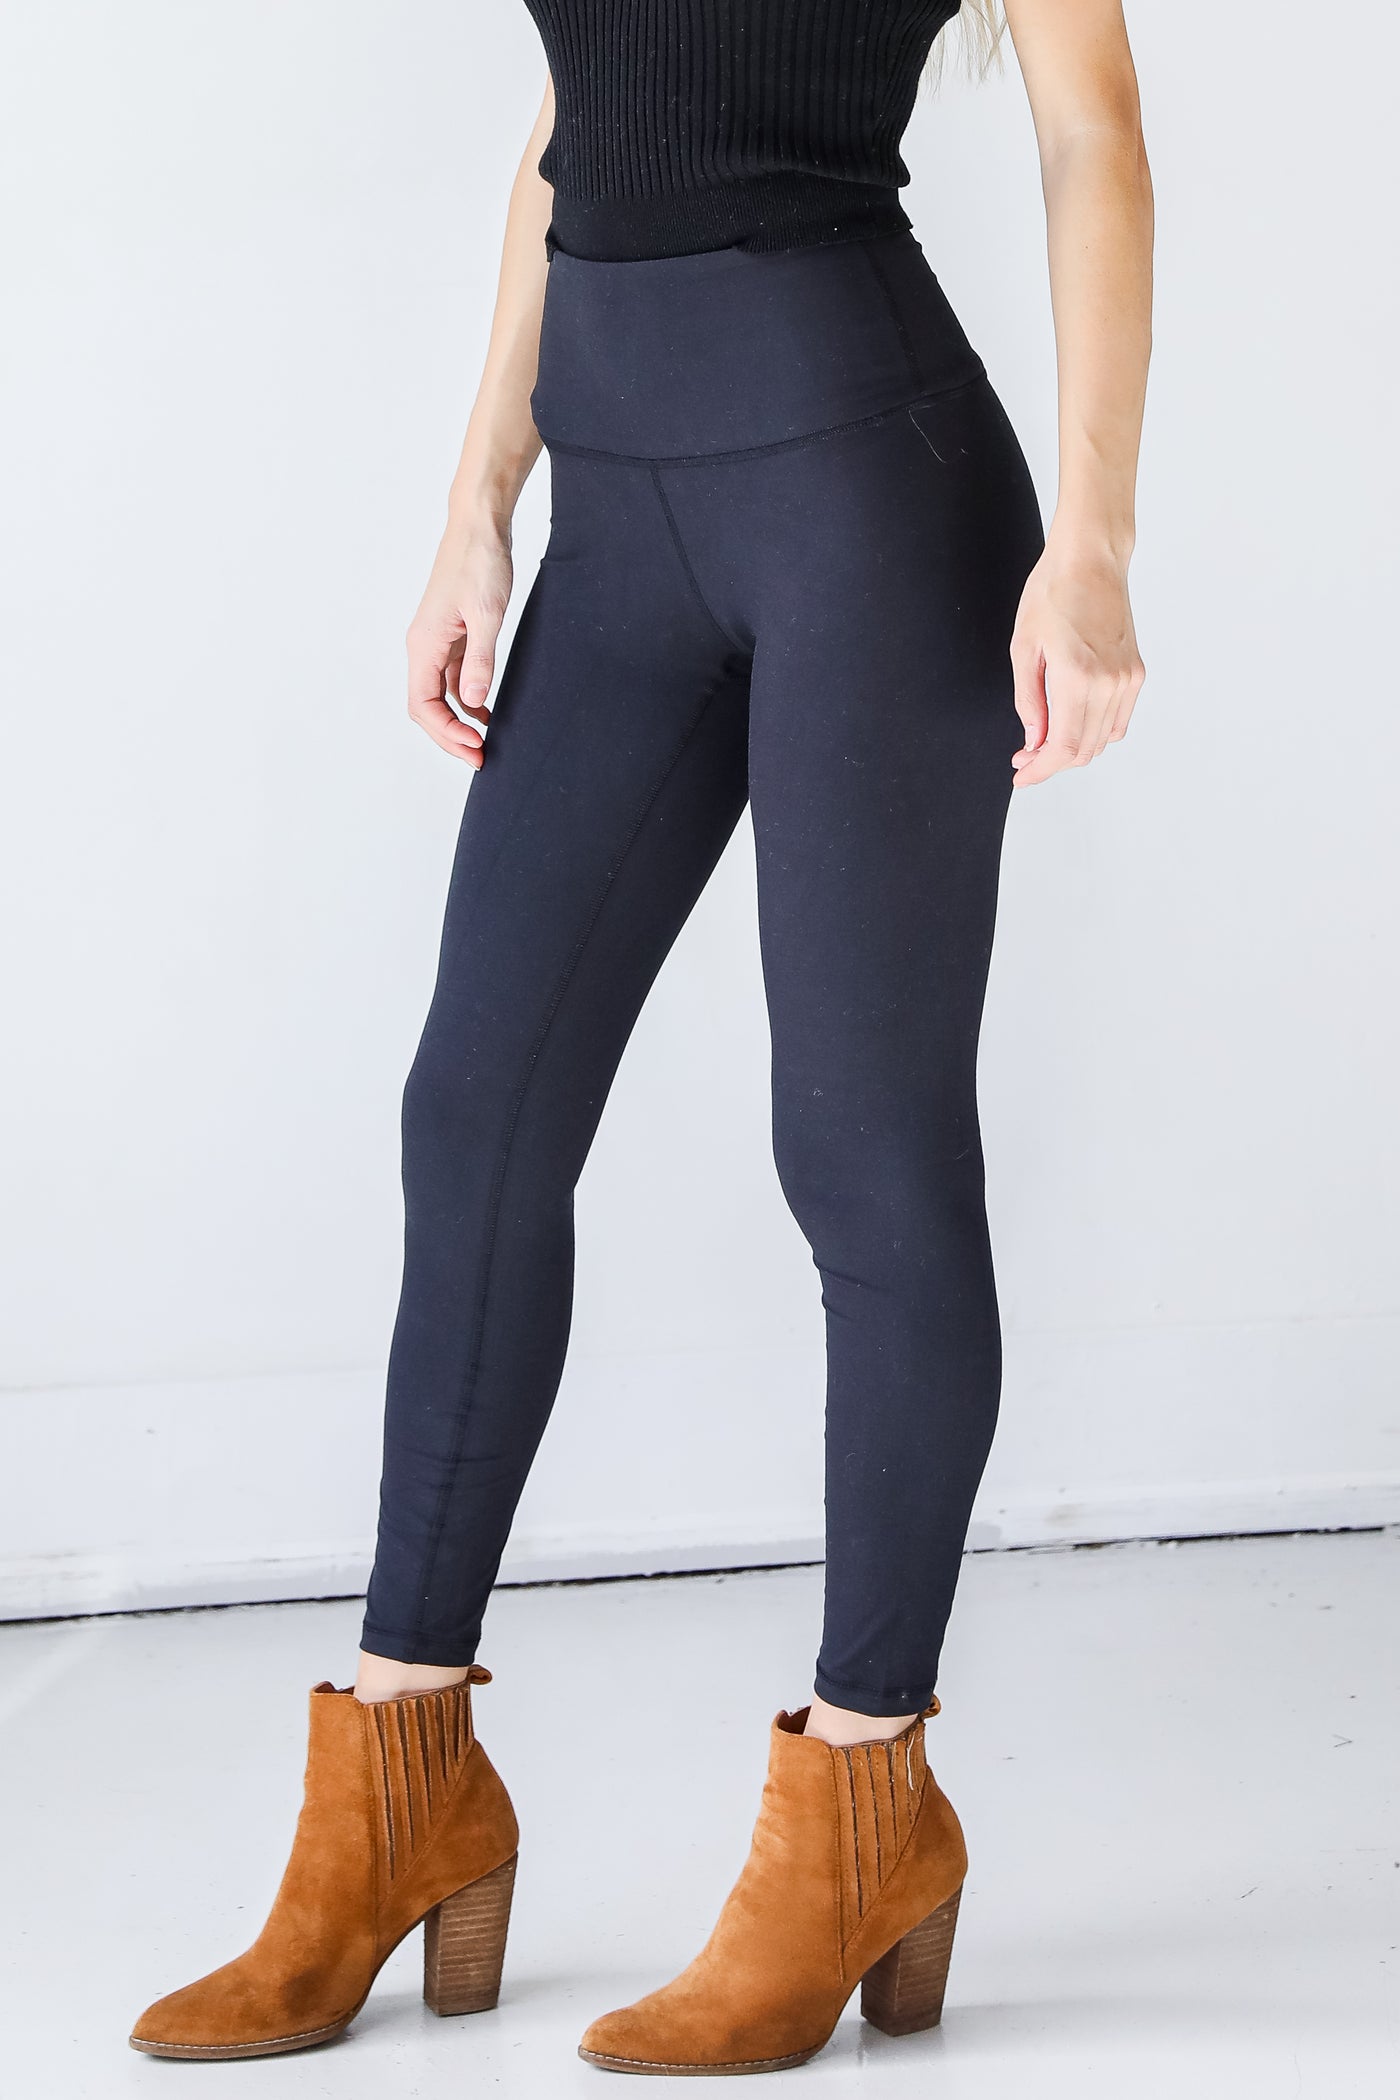 High-Waisted 7/8 Leggings side view